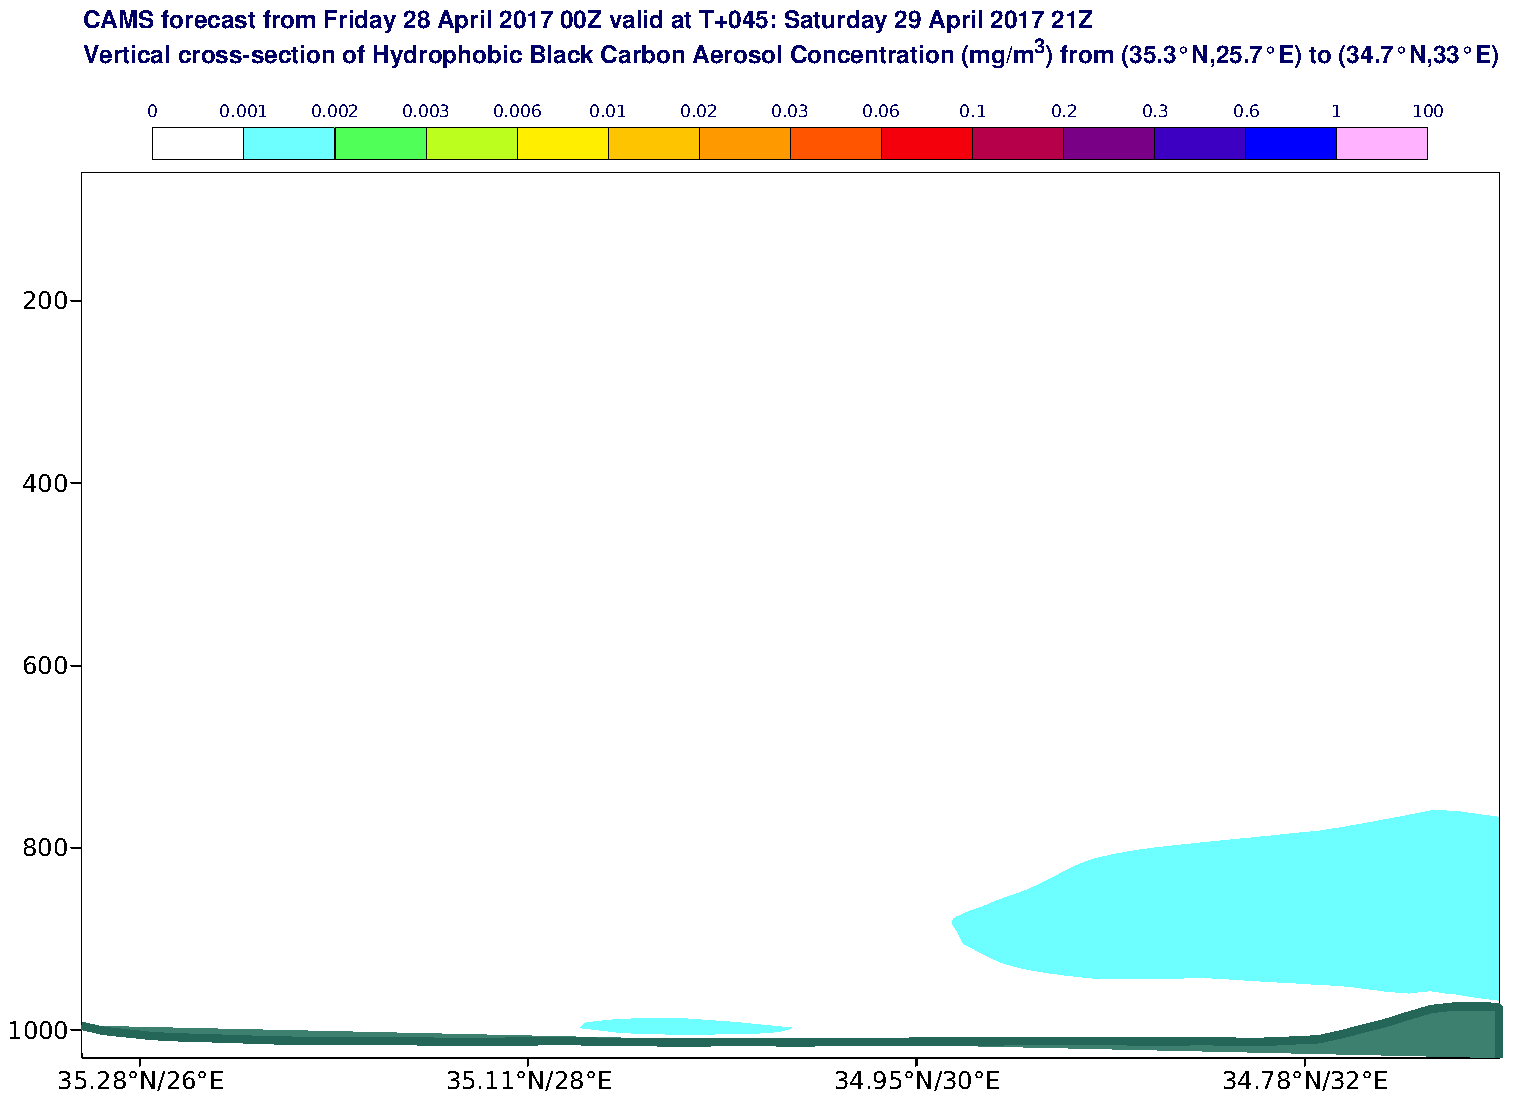 Vertical cross-section of Hydrophobic Black Carbon Aerosol Concentration (mg/m3) valid at T45 - 2017-04-29 21:00